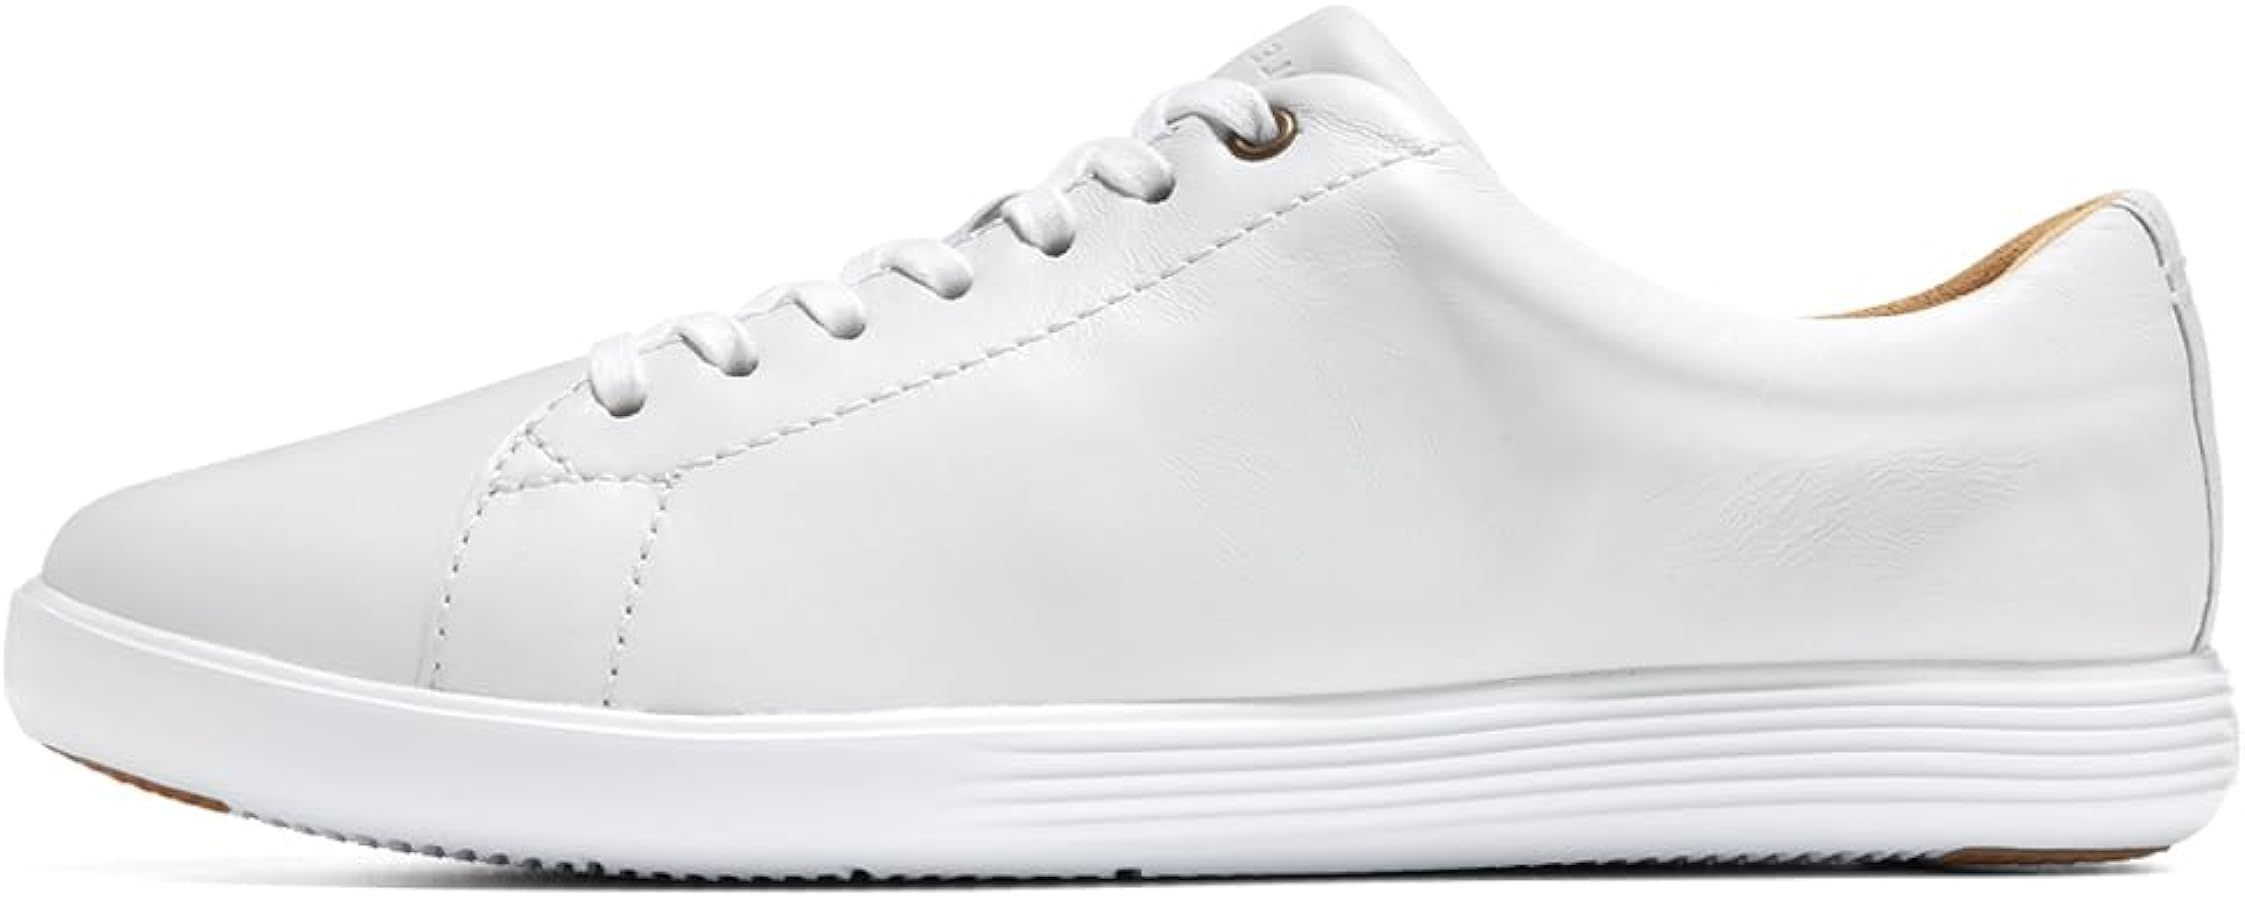 Cole Haan Womens Grand Crosscourt Lace Up Sneakers Shoes Casual - White | Amazon (US)